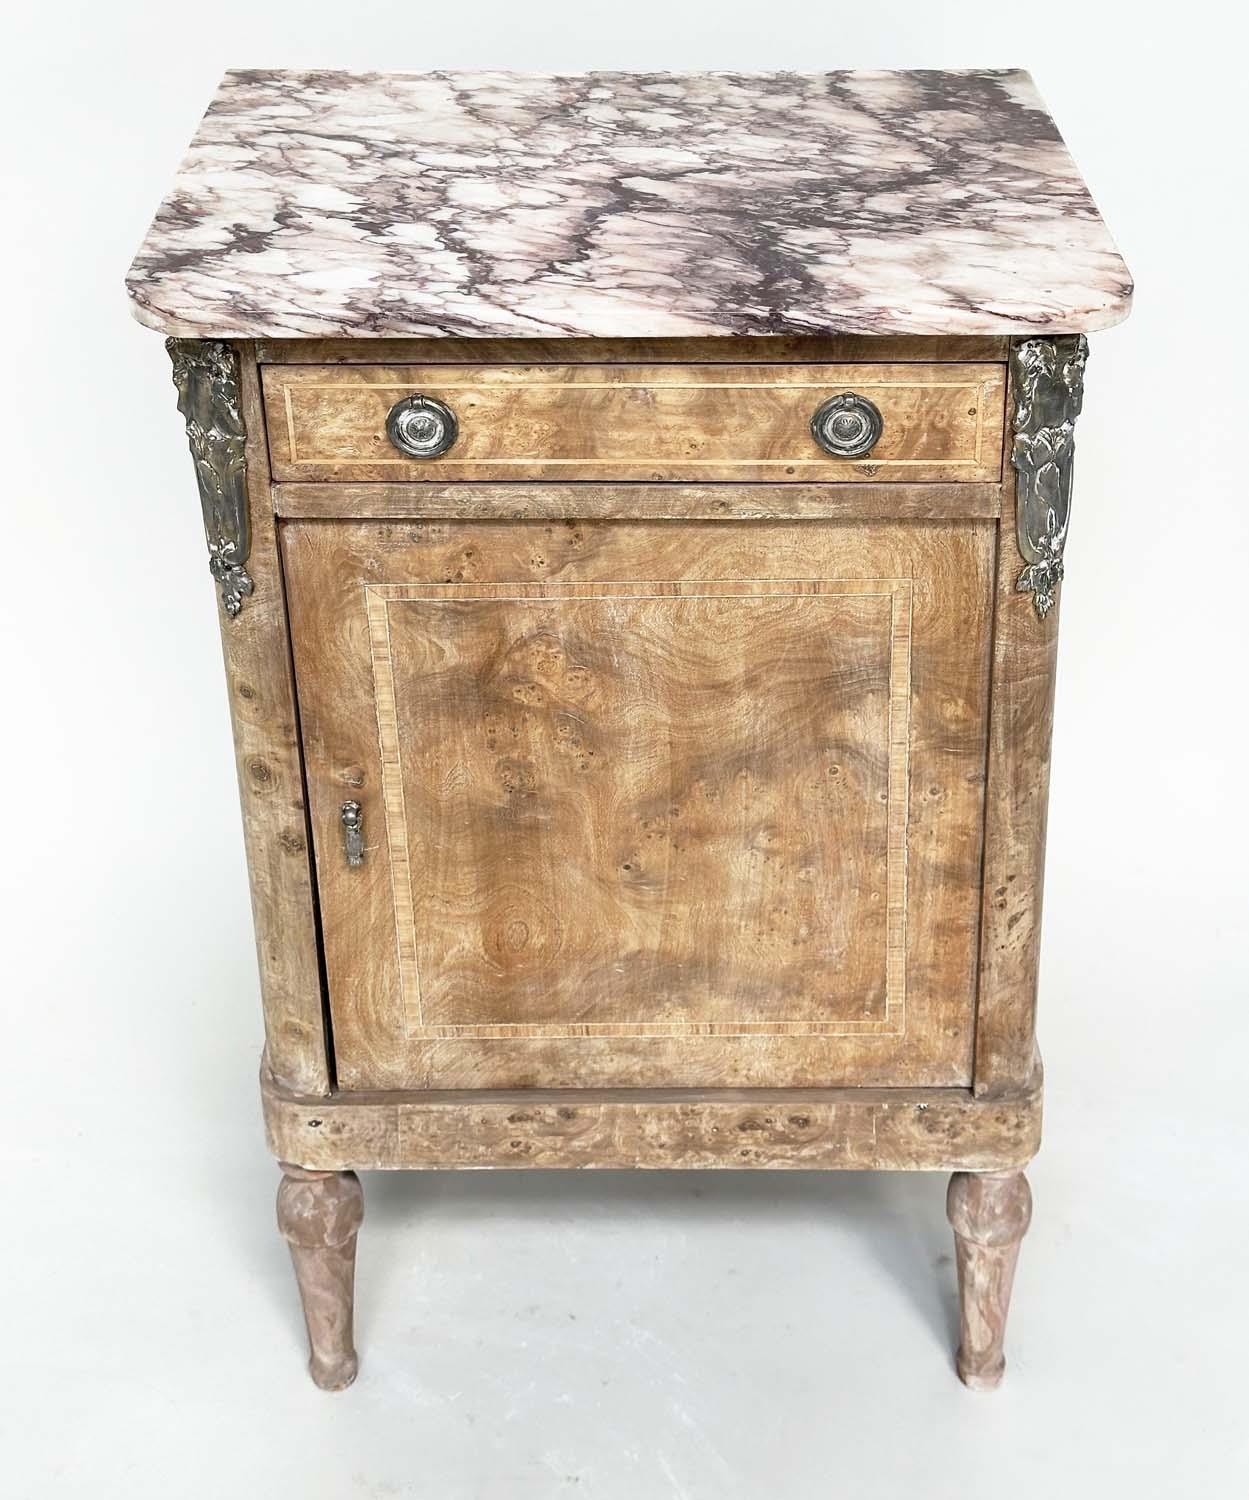 TABLES DE NUIT, a pair, 19th century French walnut and silvered metal mounted each with breche - Image 6 of 9